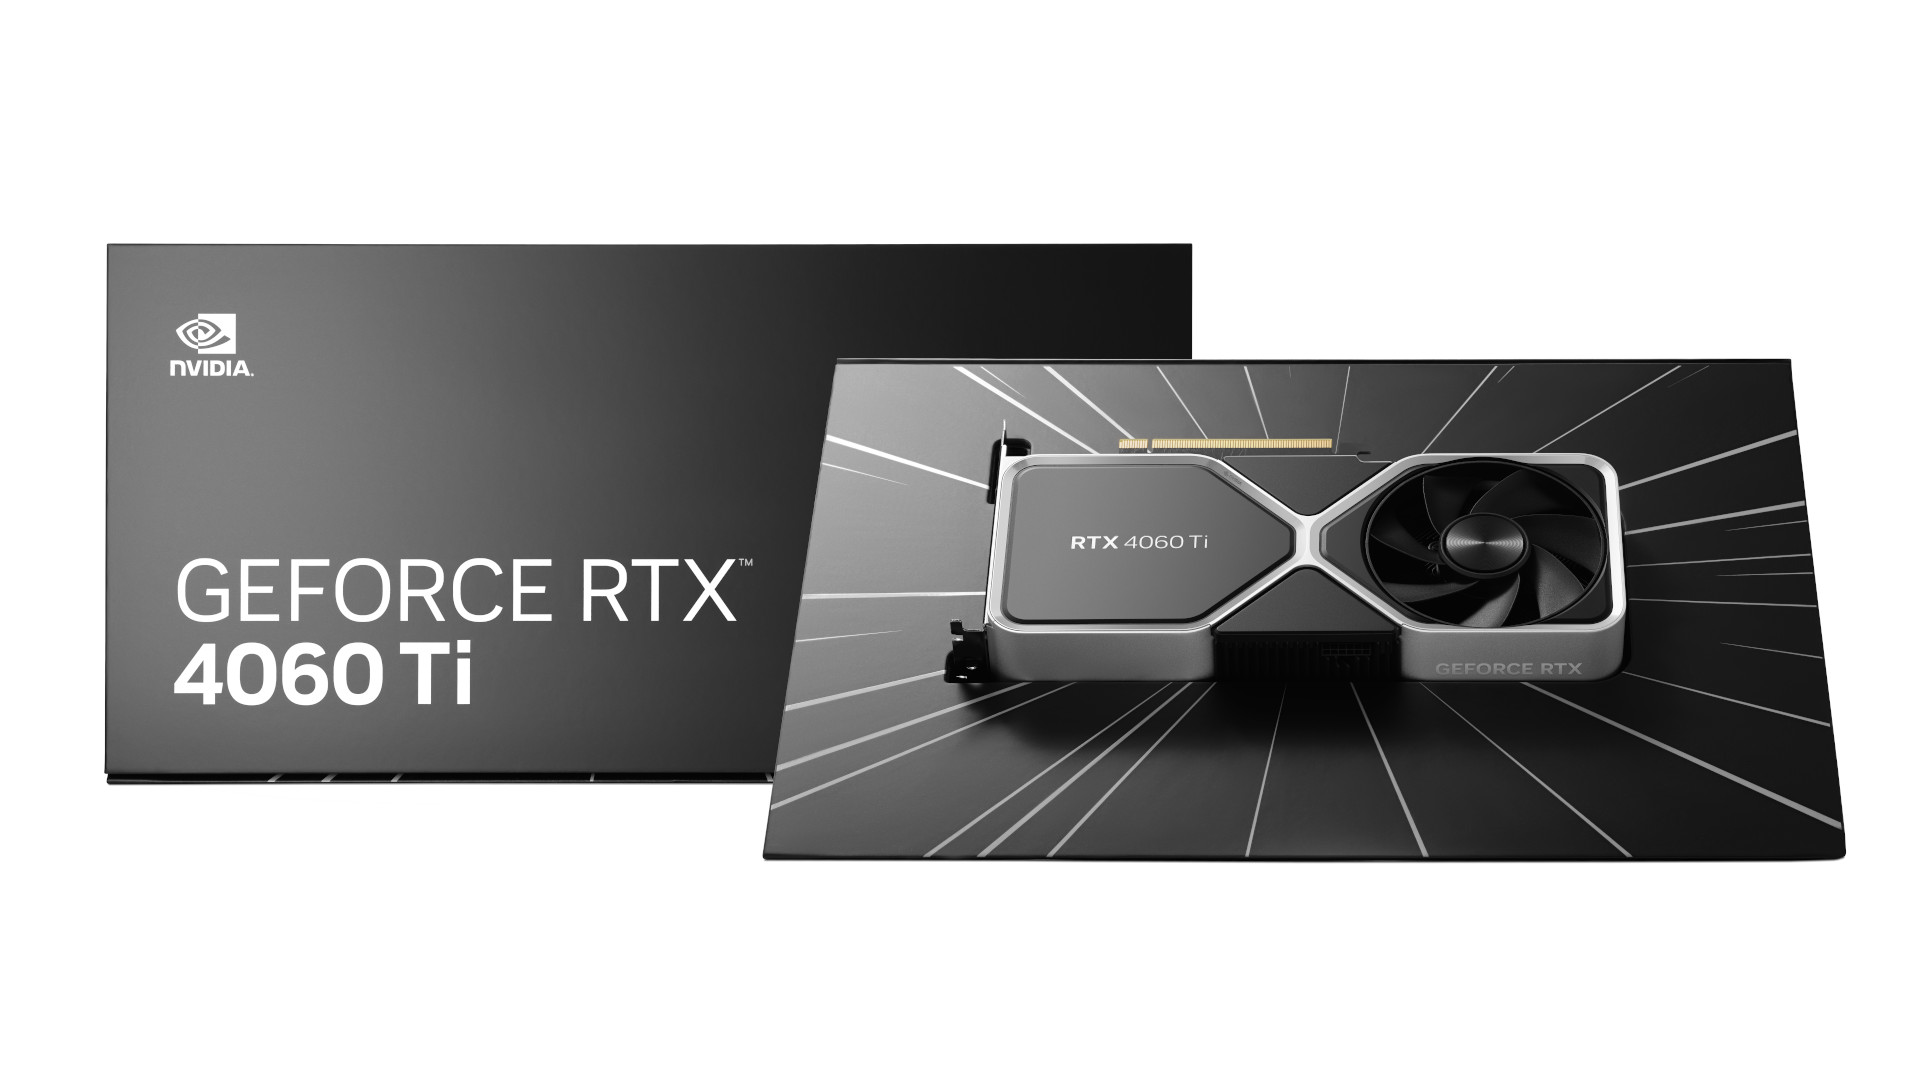 Die Nvidia RTX 4060 in der Founders Edition-Verpackung